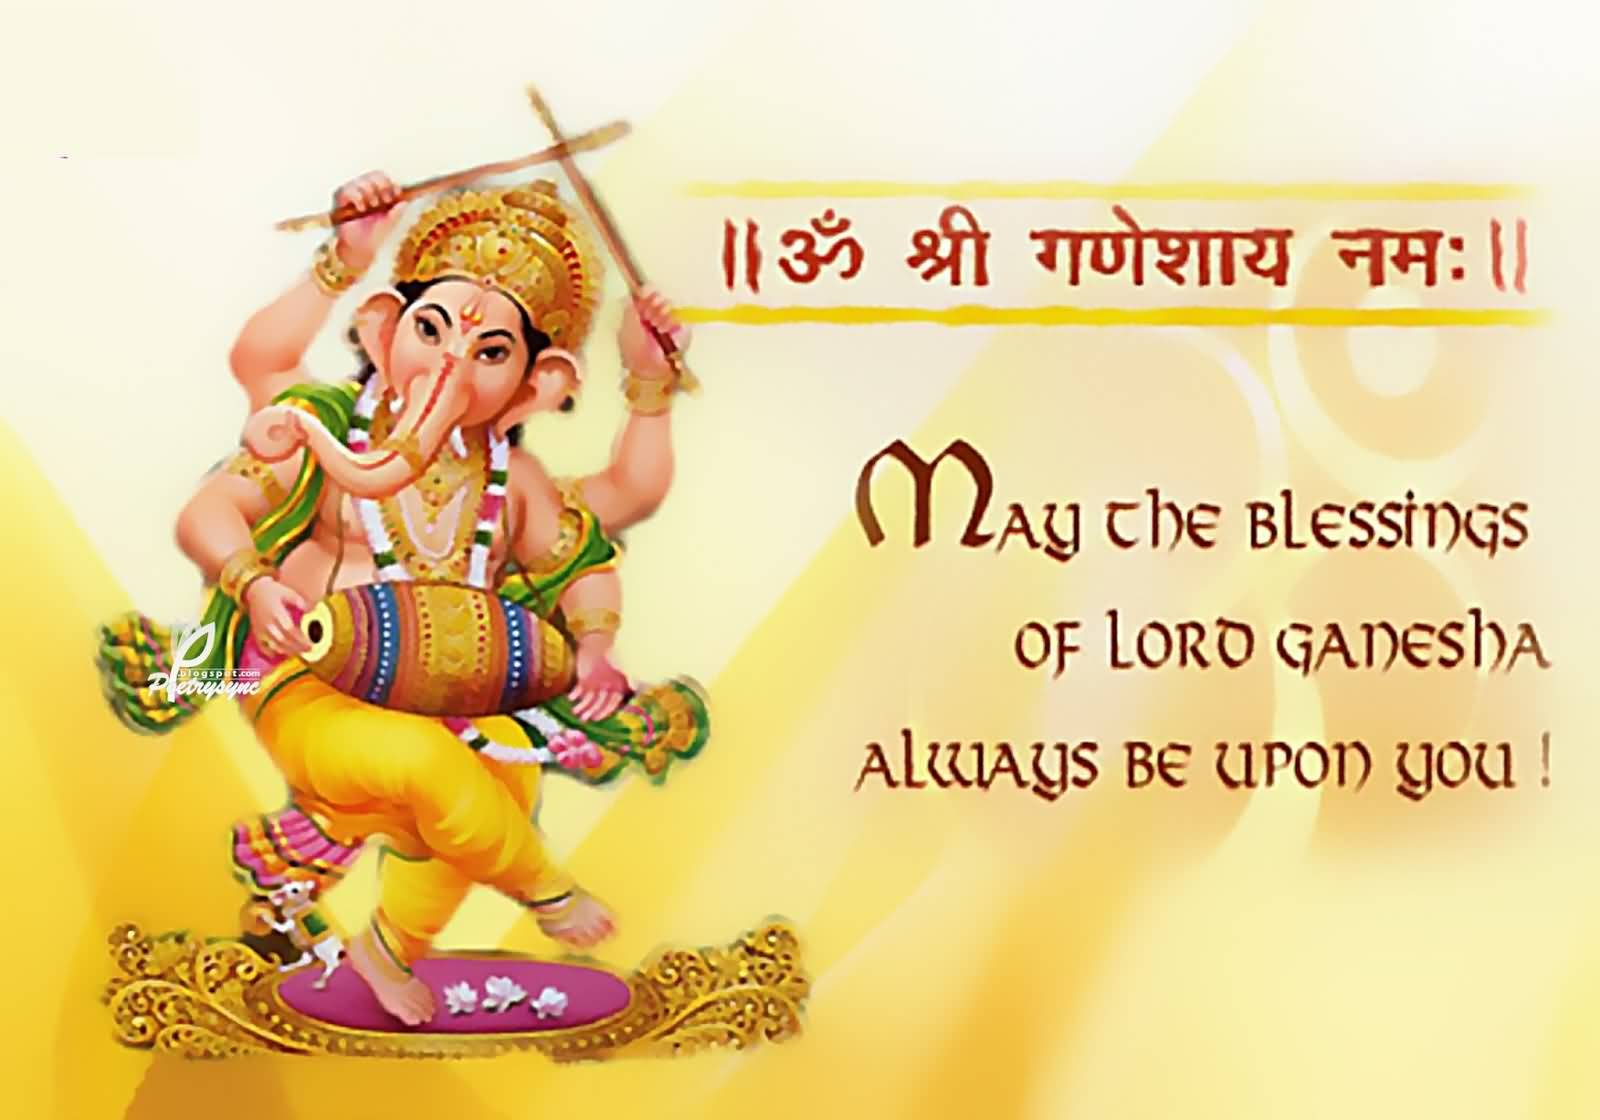 May The Blessings Of Lord Ganesha Always Be Upon You